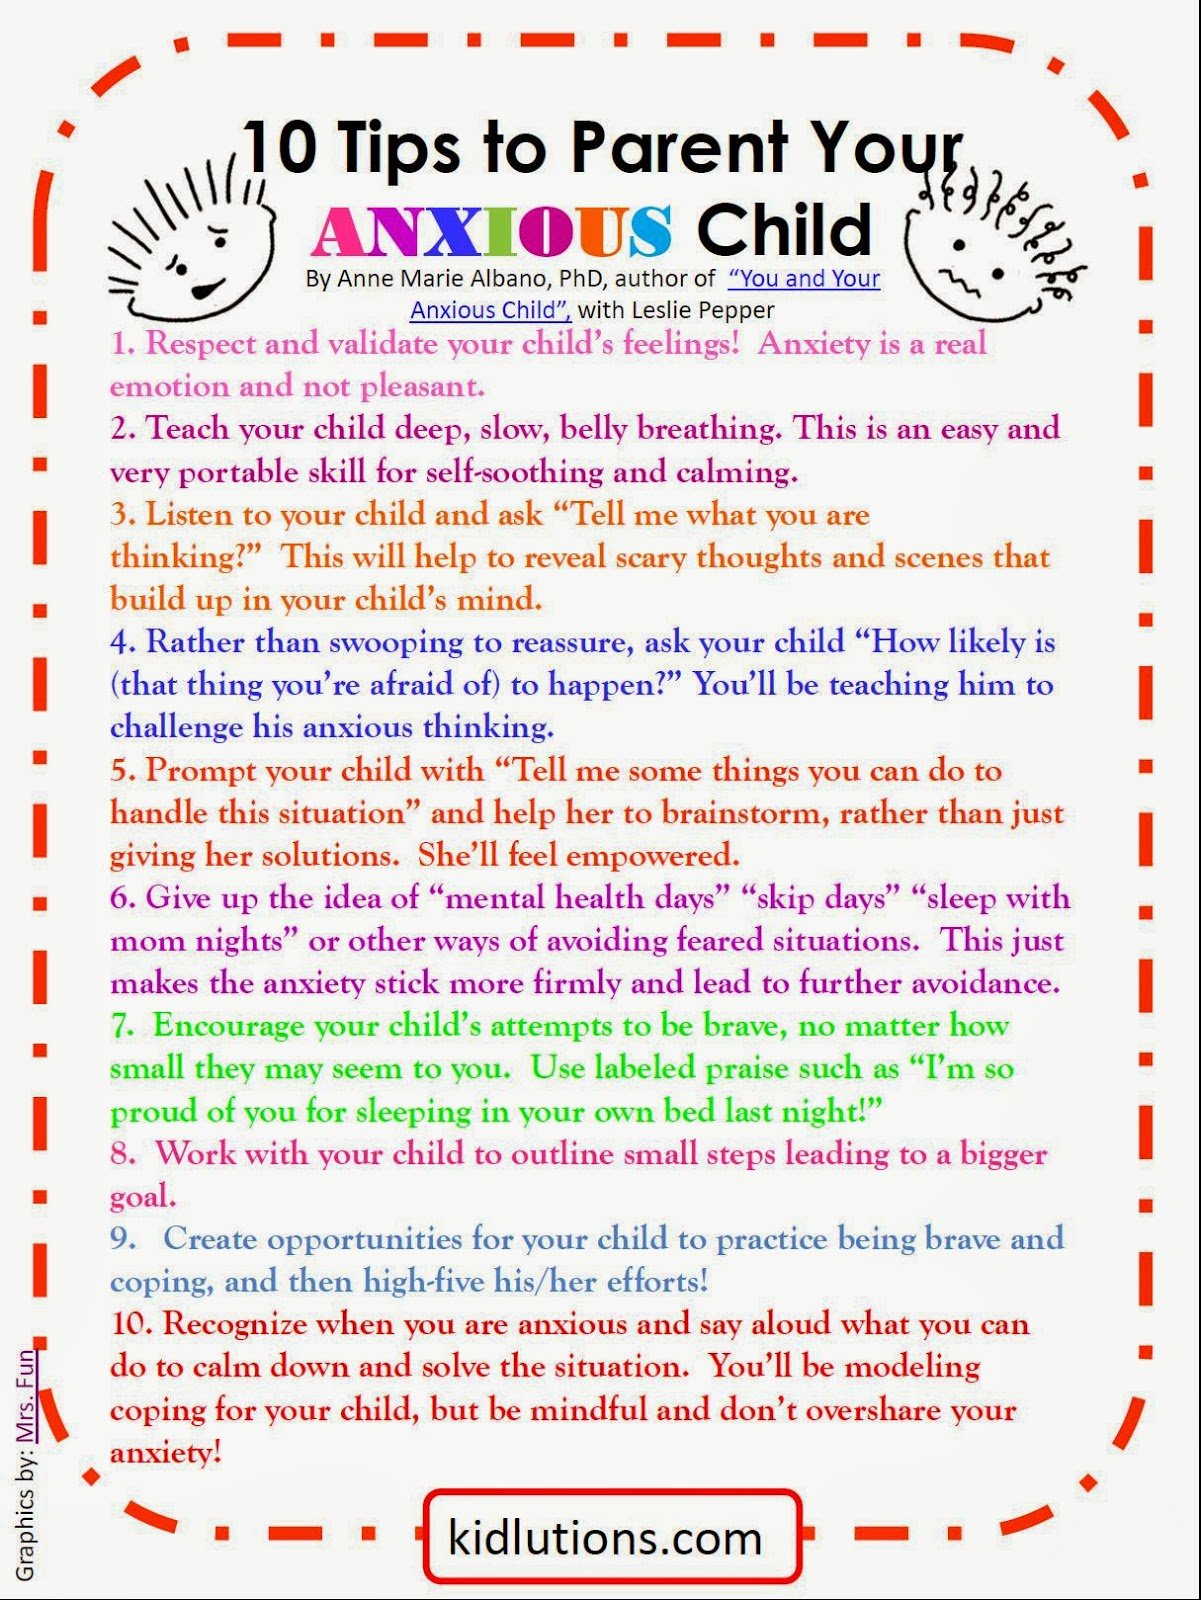 10 Tips to Parent Your Anxious Child